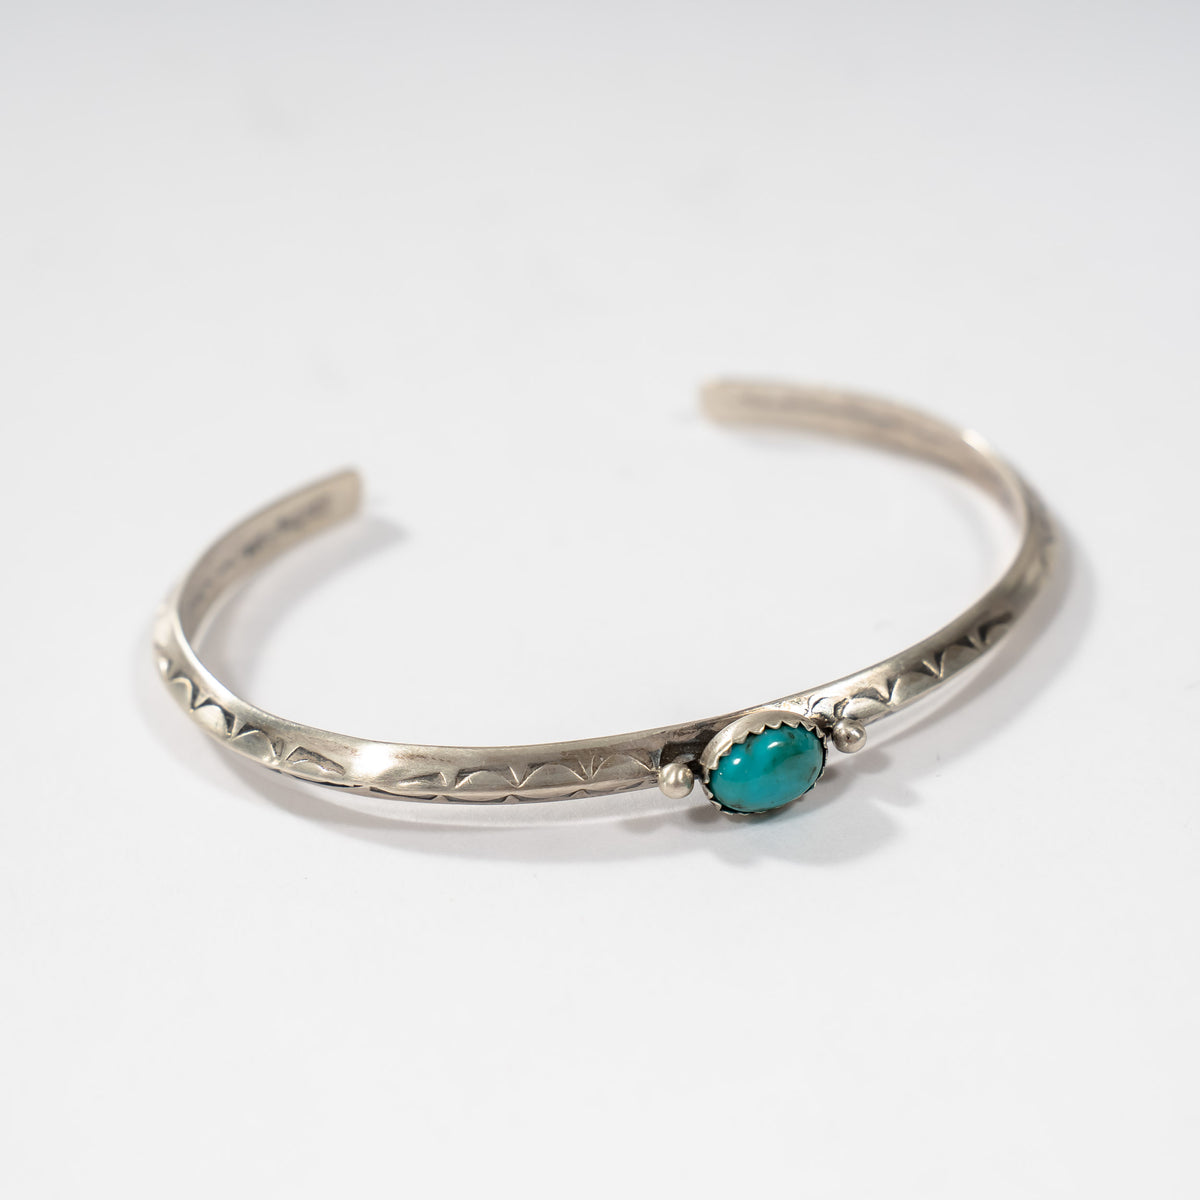 Handcrafted Turquoise and Sterling Silver Bracelet